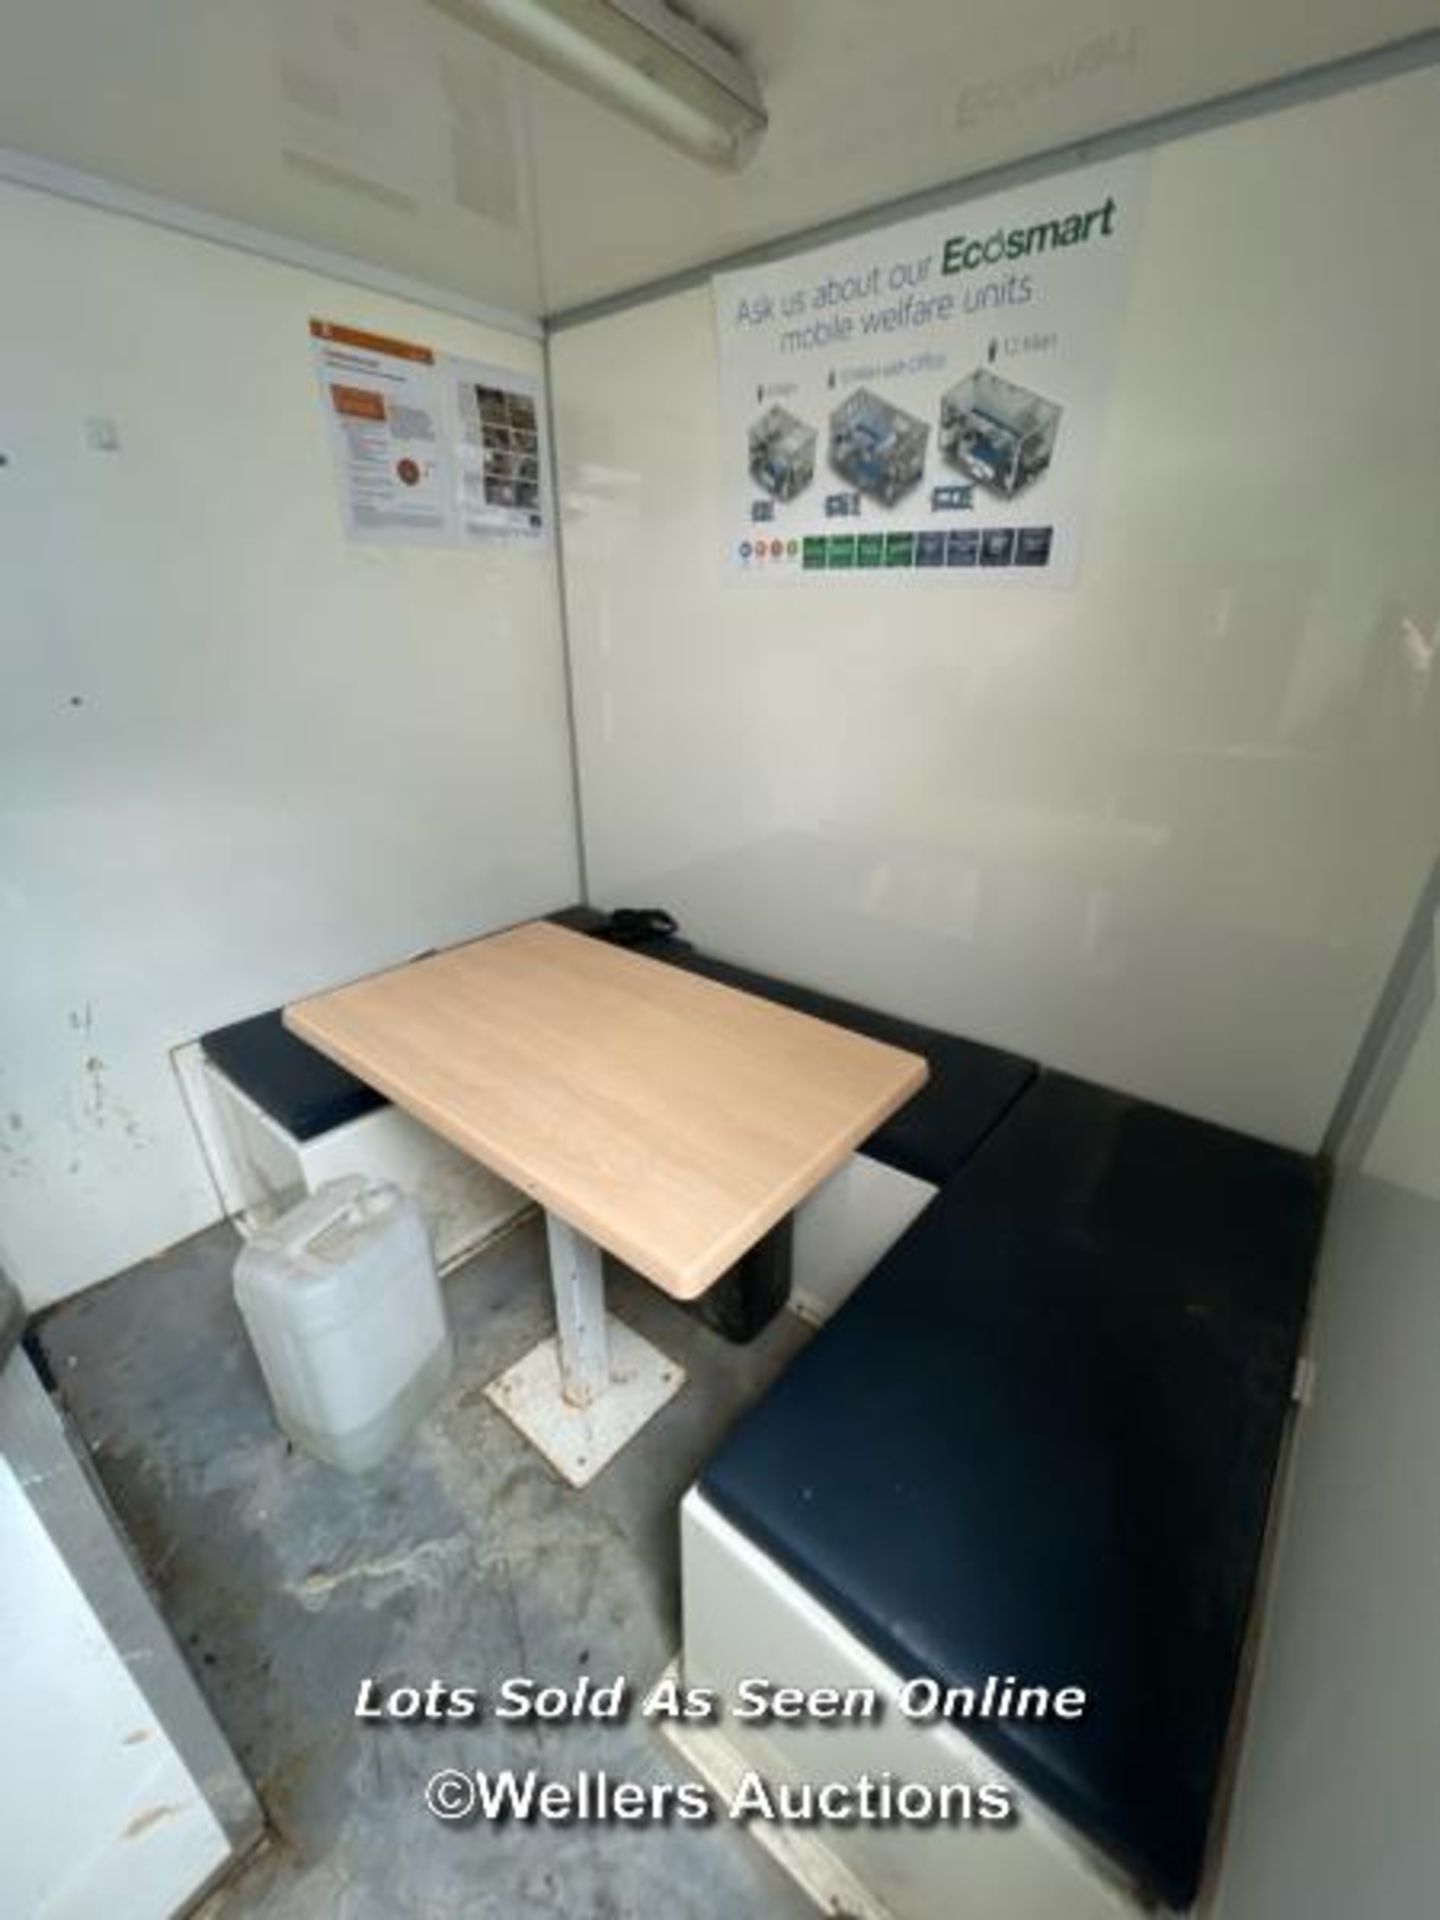 6 PERSON 12 X 7.5FT AJC EASY CABIN TOWABLE WELFARE UNIT, INCLUDES WASH BASIN, KETTLE, MICROWAVE, - Image 7 of 18